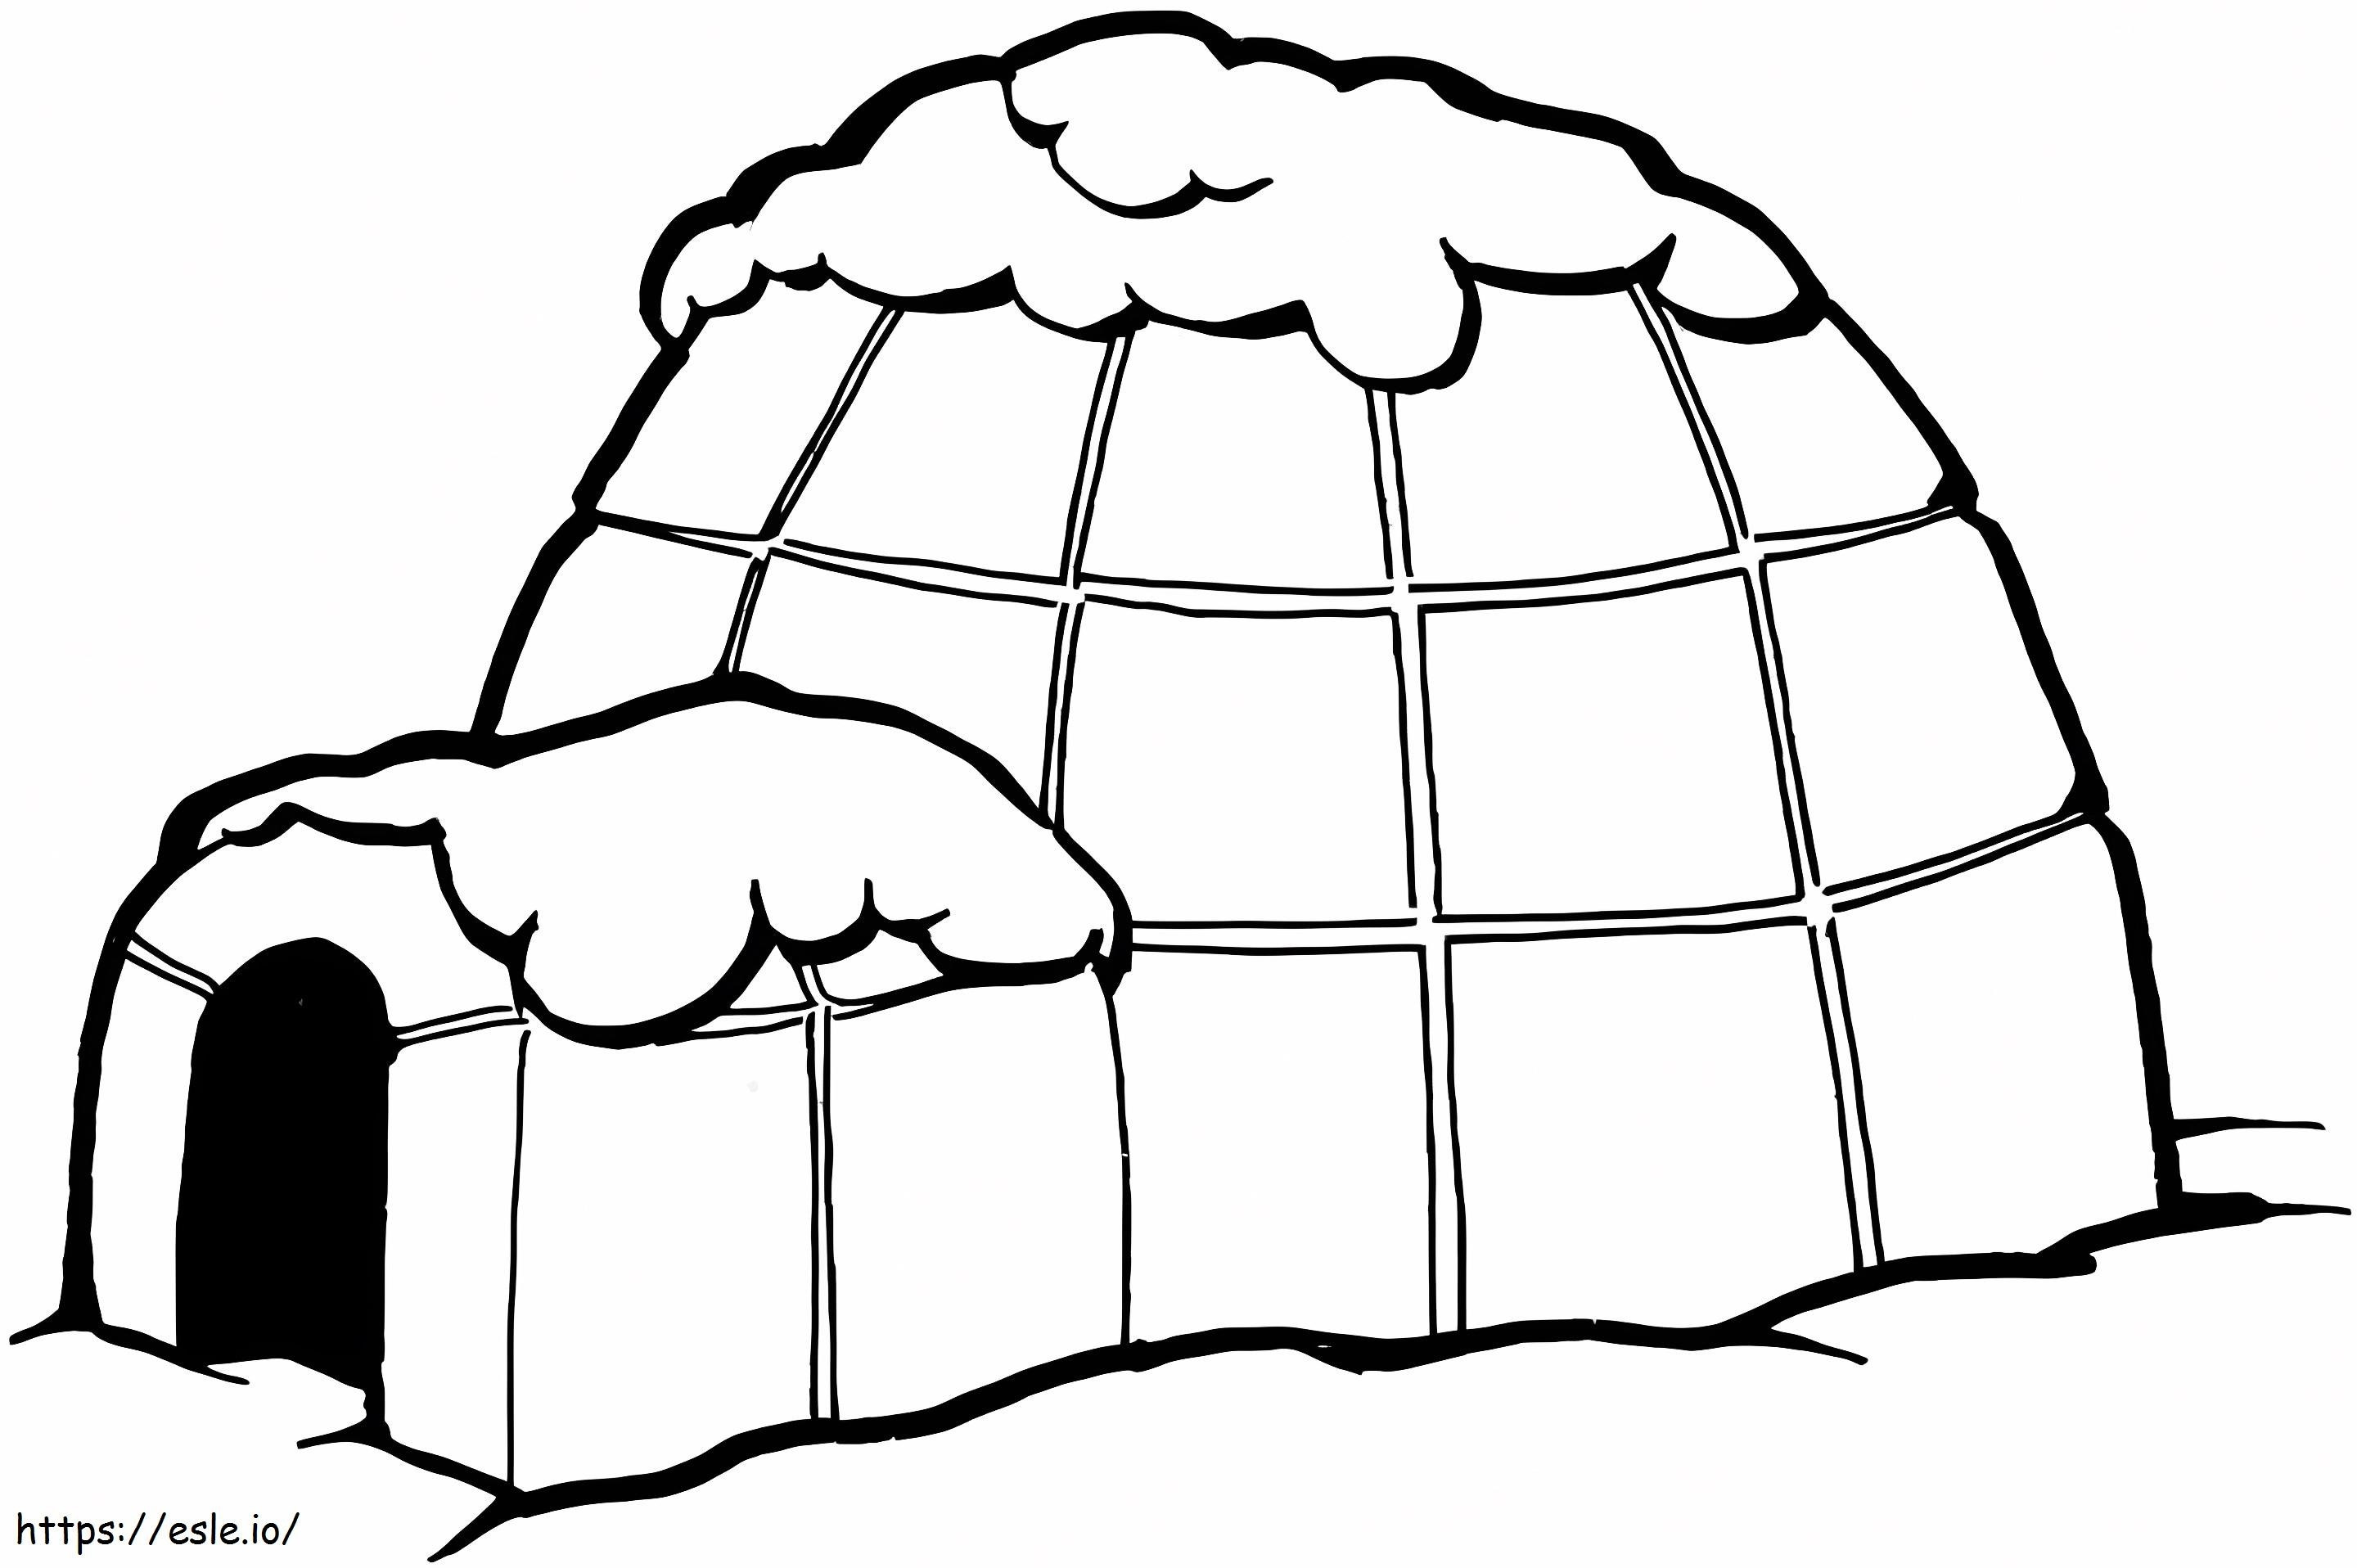 Igloo 6 coloring page